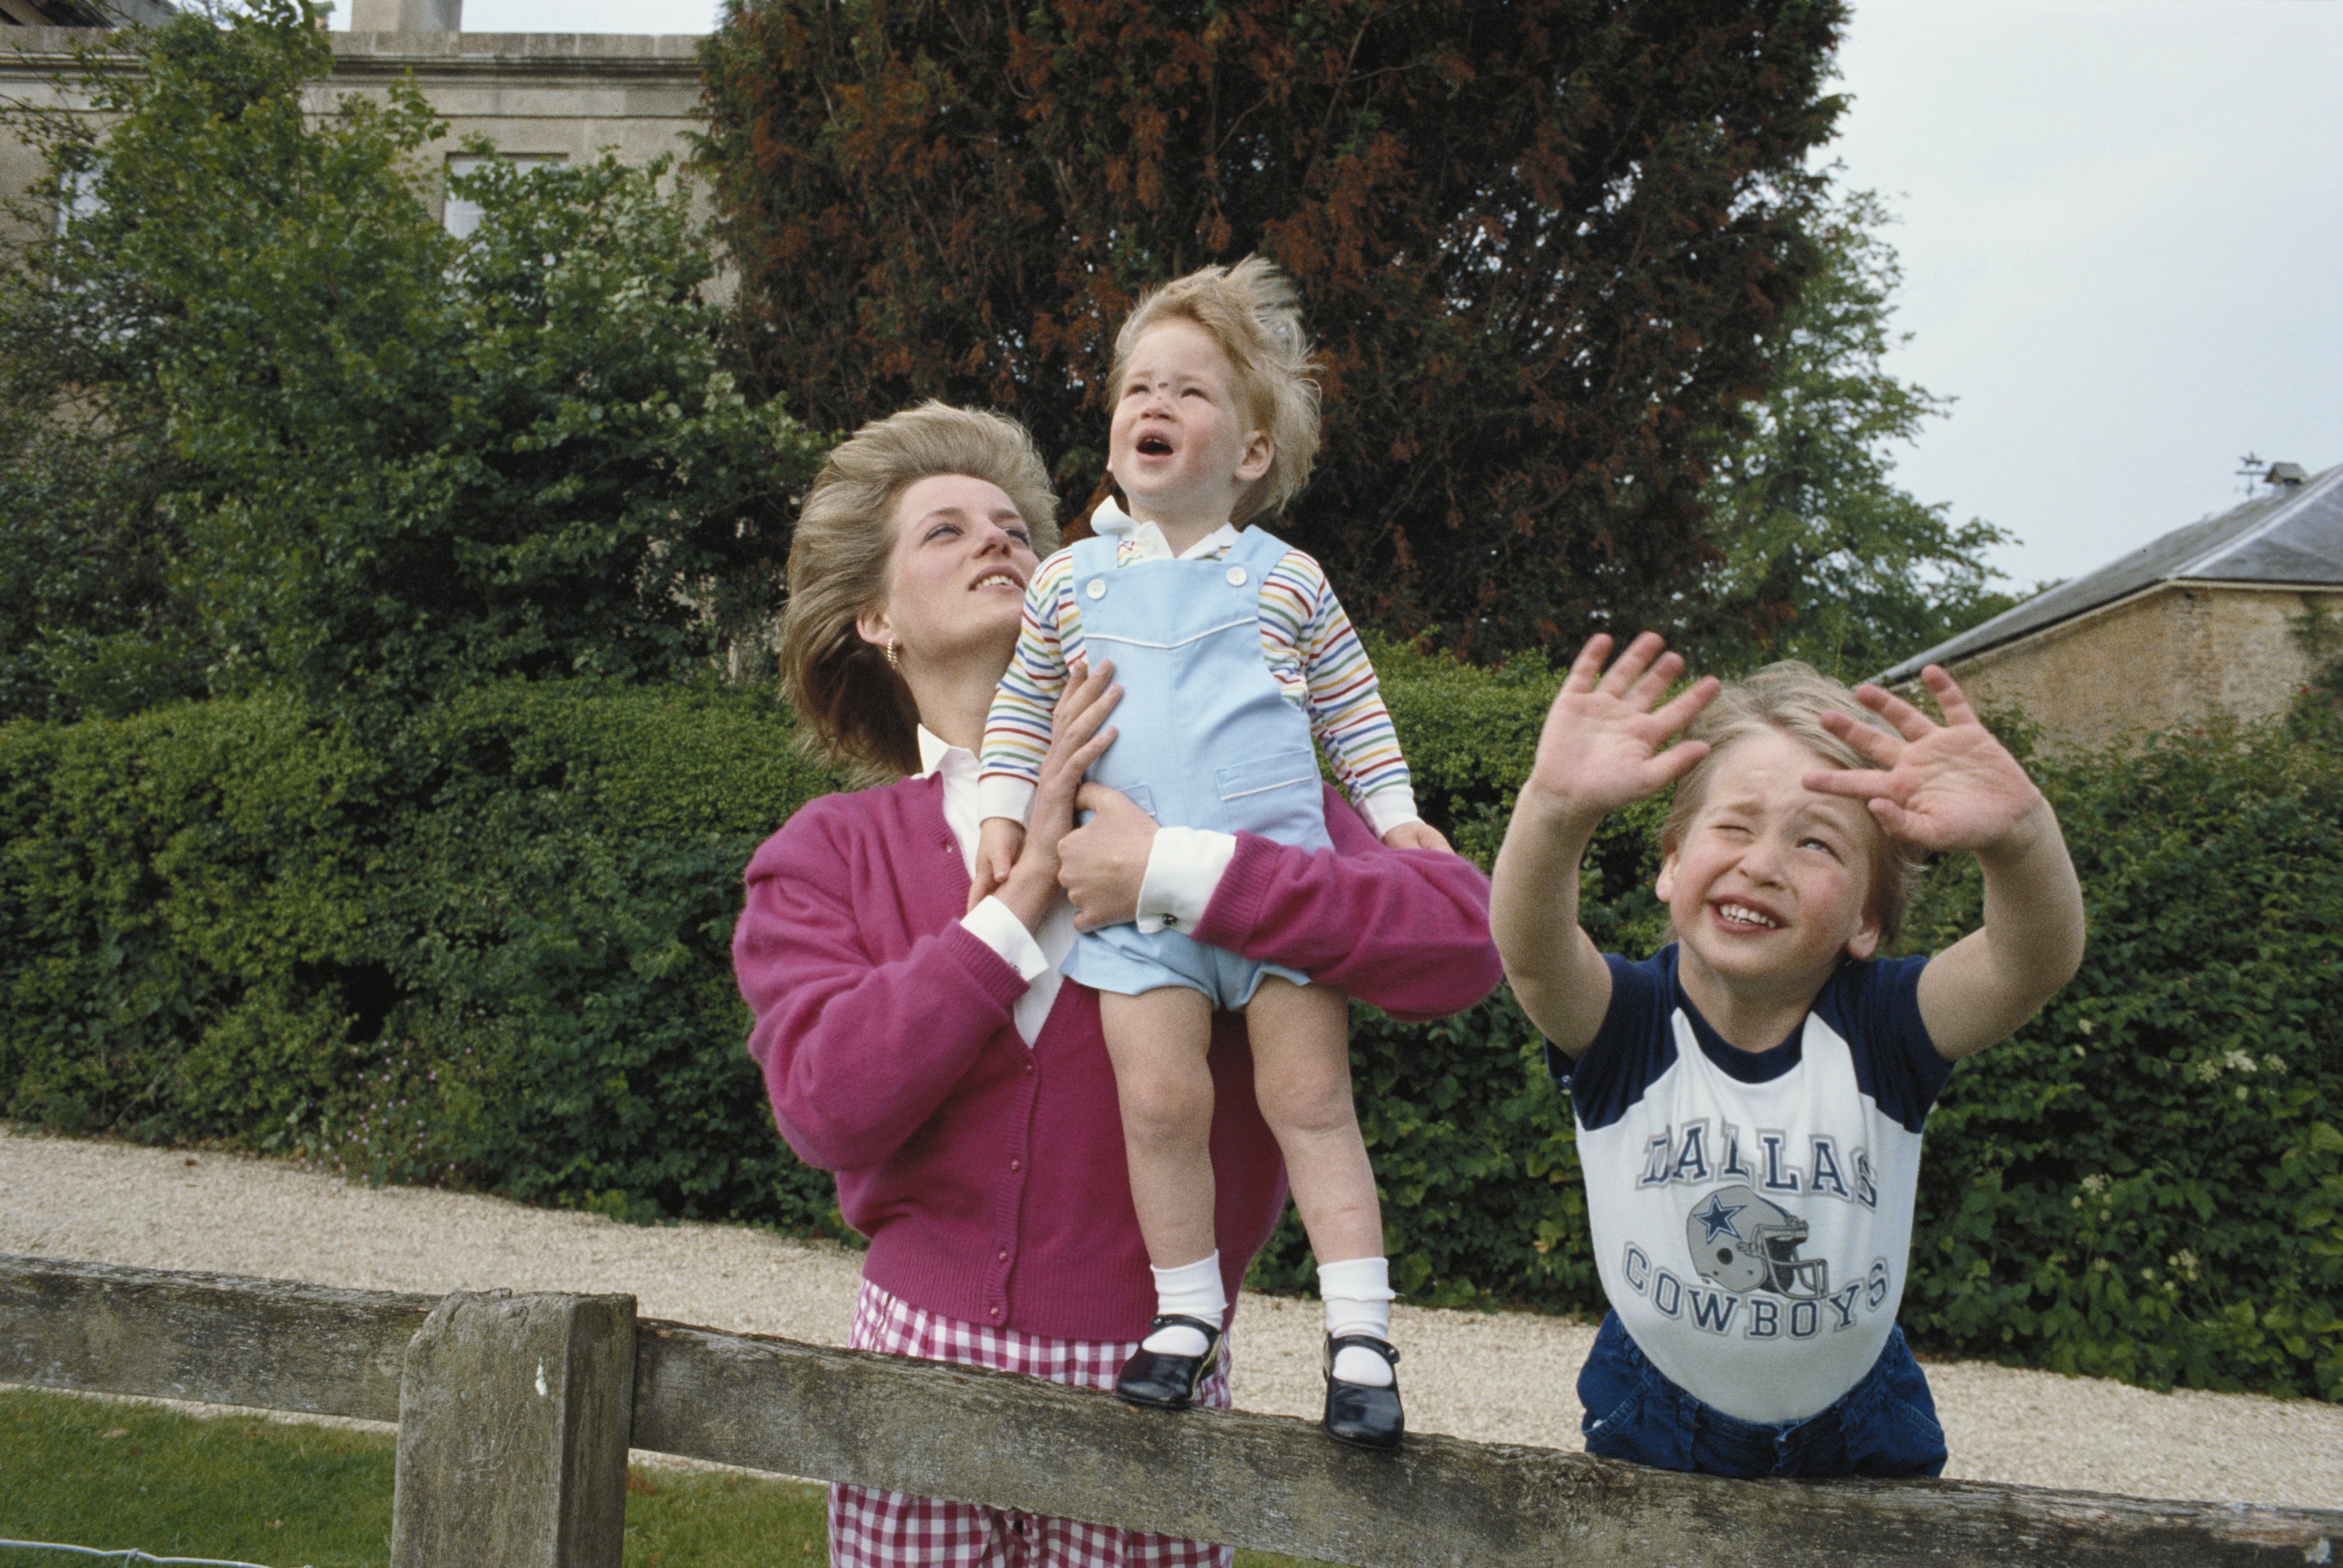 Princes William and Harry with their mother, Diana, Princess of Wales in the garden of Highgrove House in Gloucestershire, 18th July 1986. (Tim Graham—Tim Graham/Getty Images)